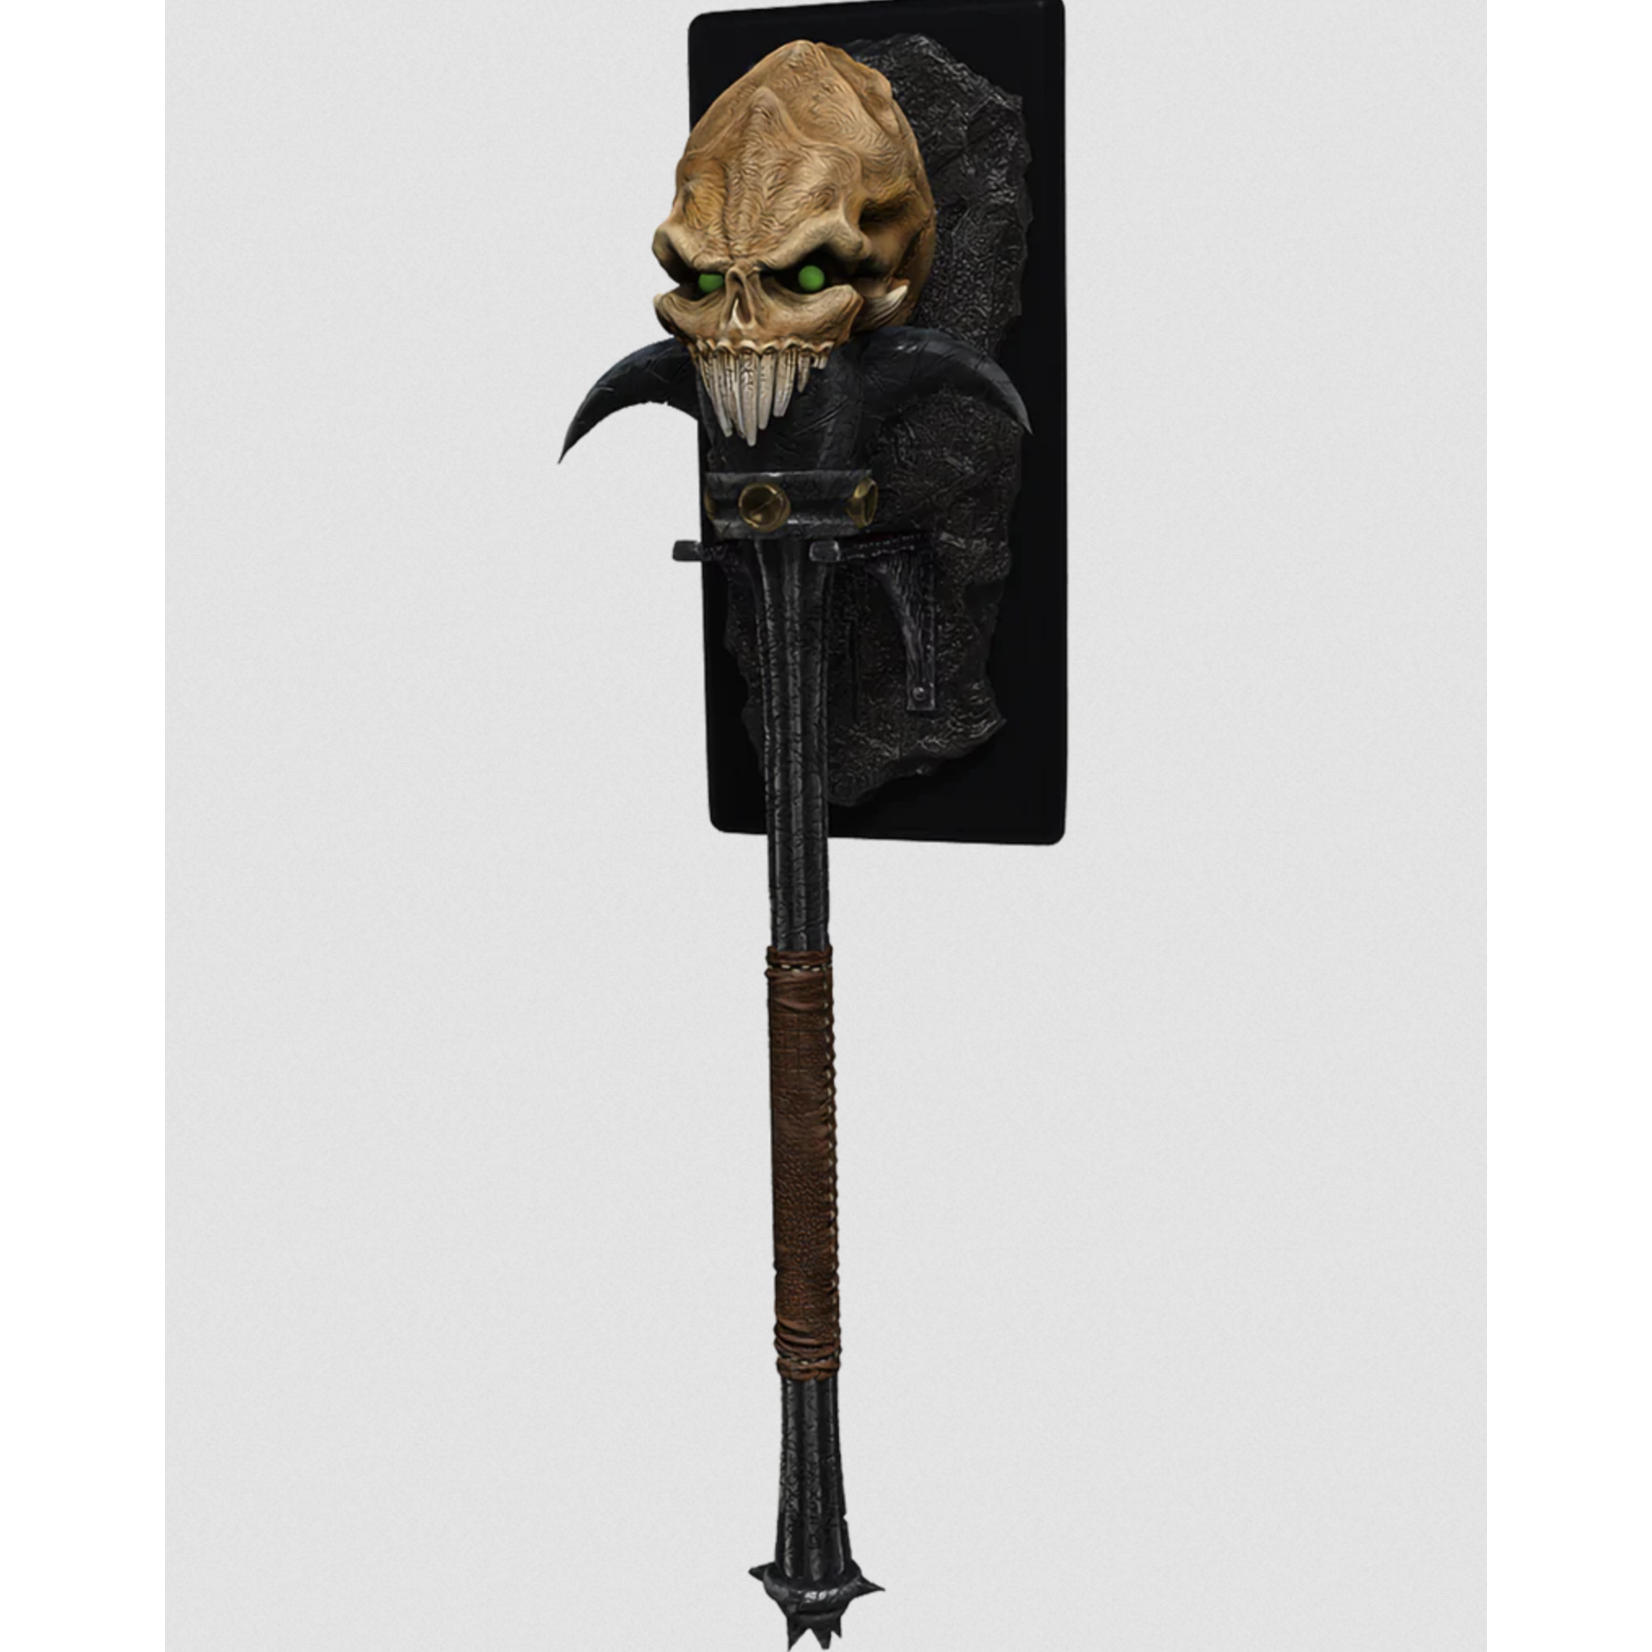 WIZKIDS/NECA D&D Wand of Orcus Life-Sized Artifact